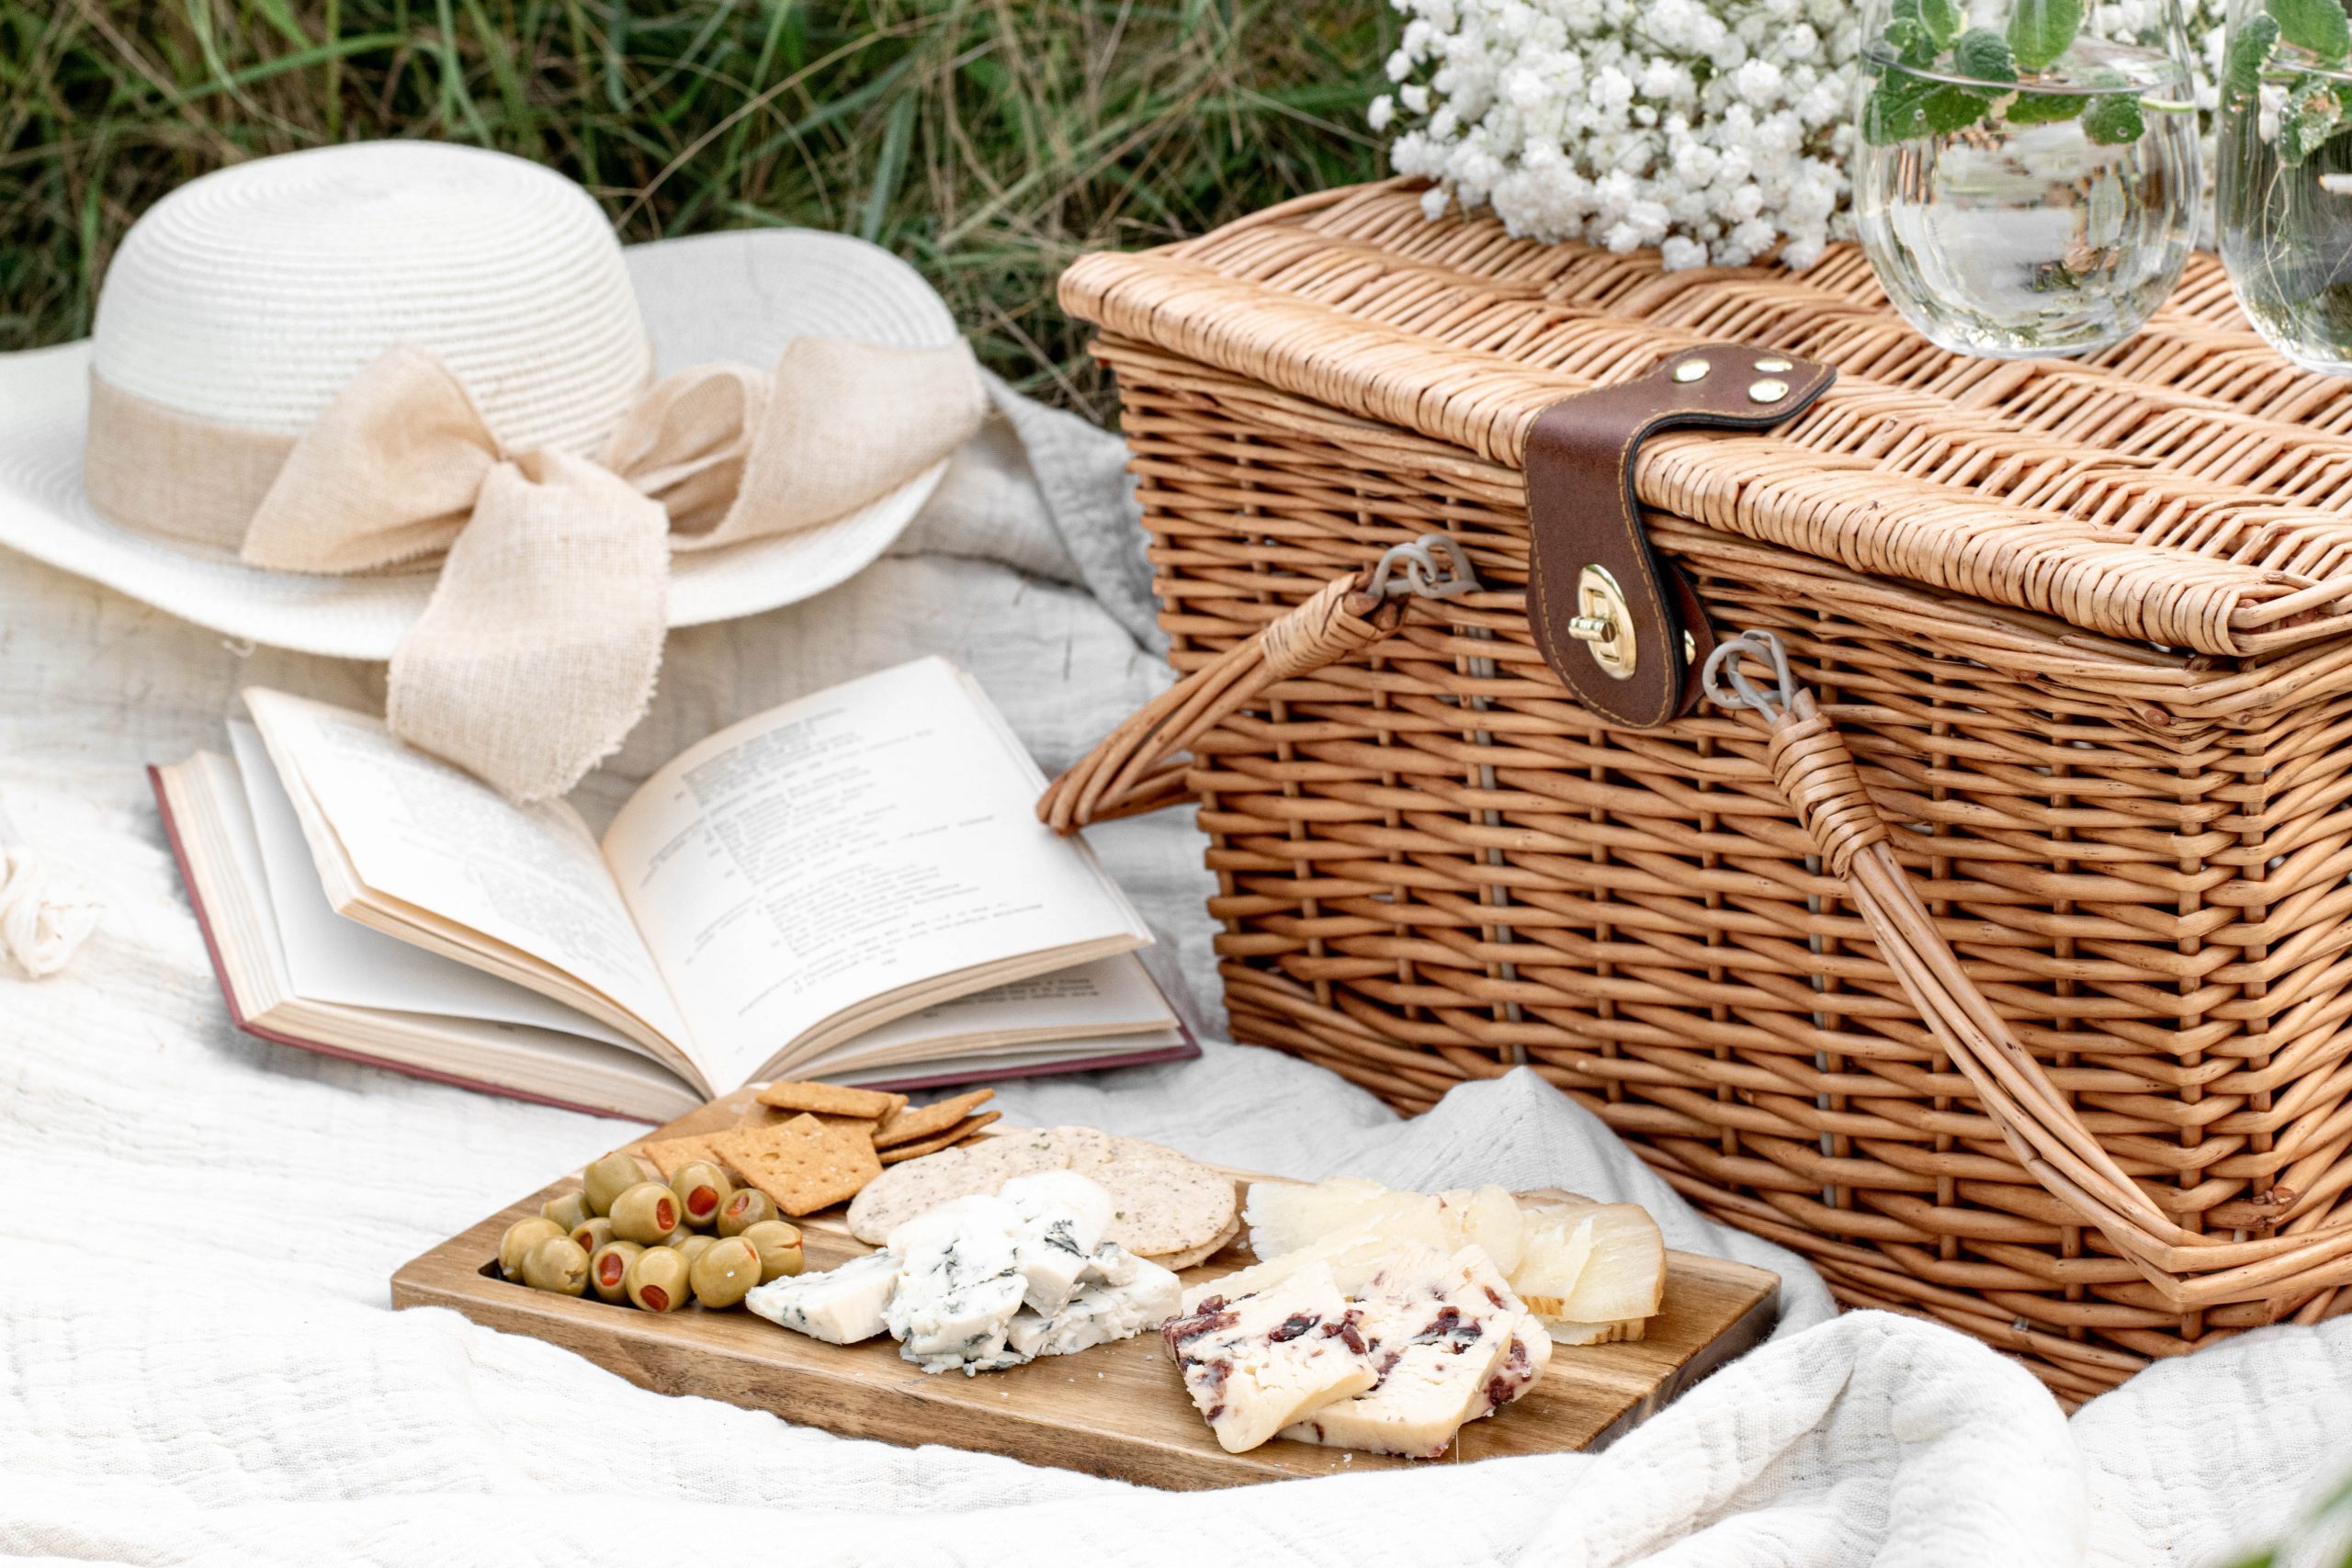 Laid out on a blanket, a cheese platter, a book, a ladies straw hat and a picnic basket.